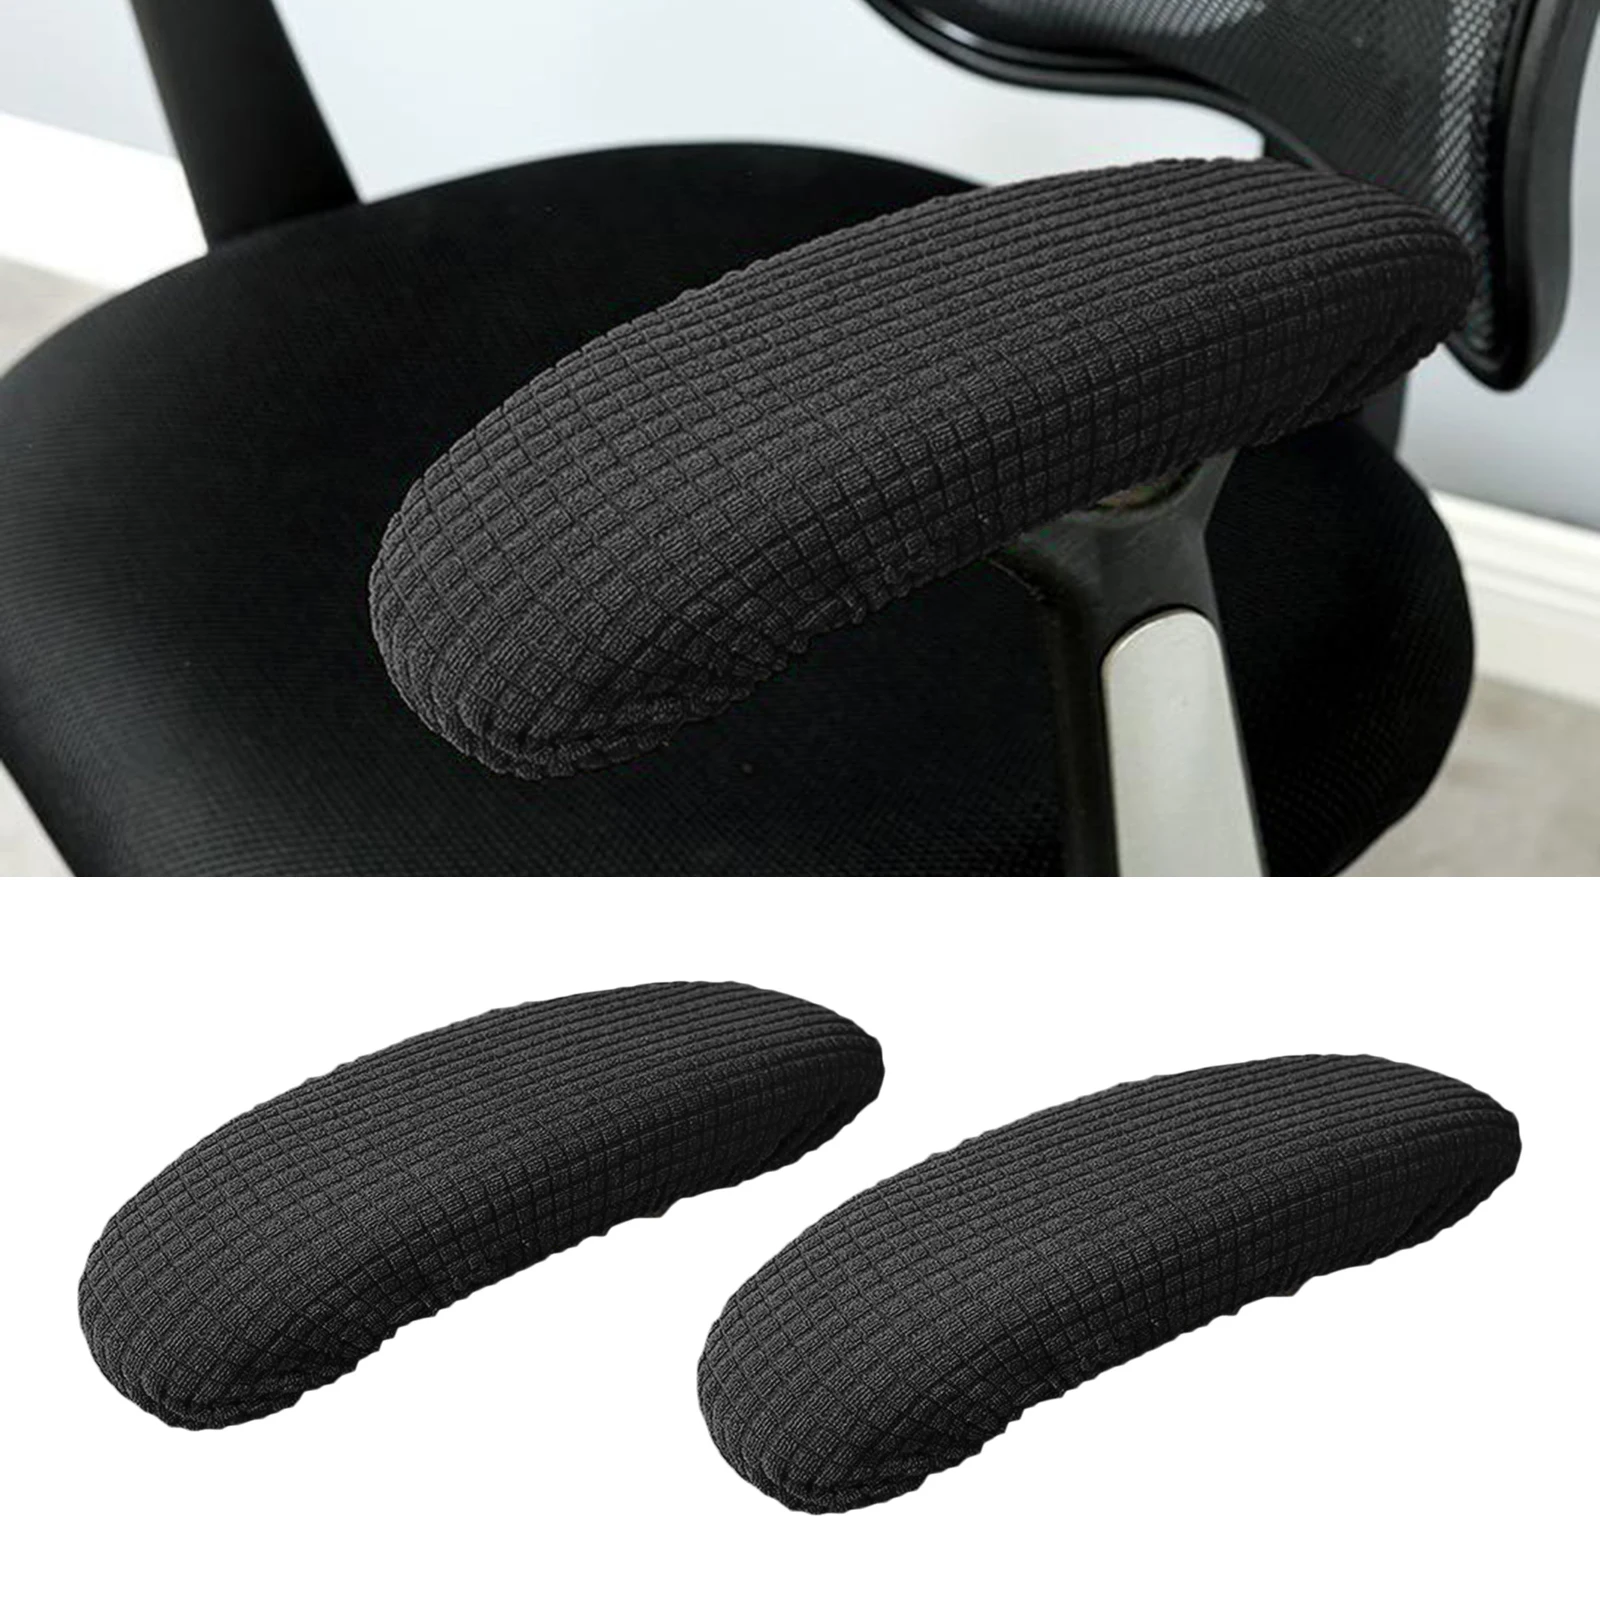 2pcs Chair Armrest Covers For Home Office Chairs For Elbow Polyester Armrest Slip Proof Sleeve Chair Arms Cover